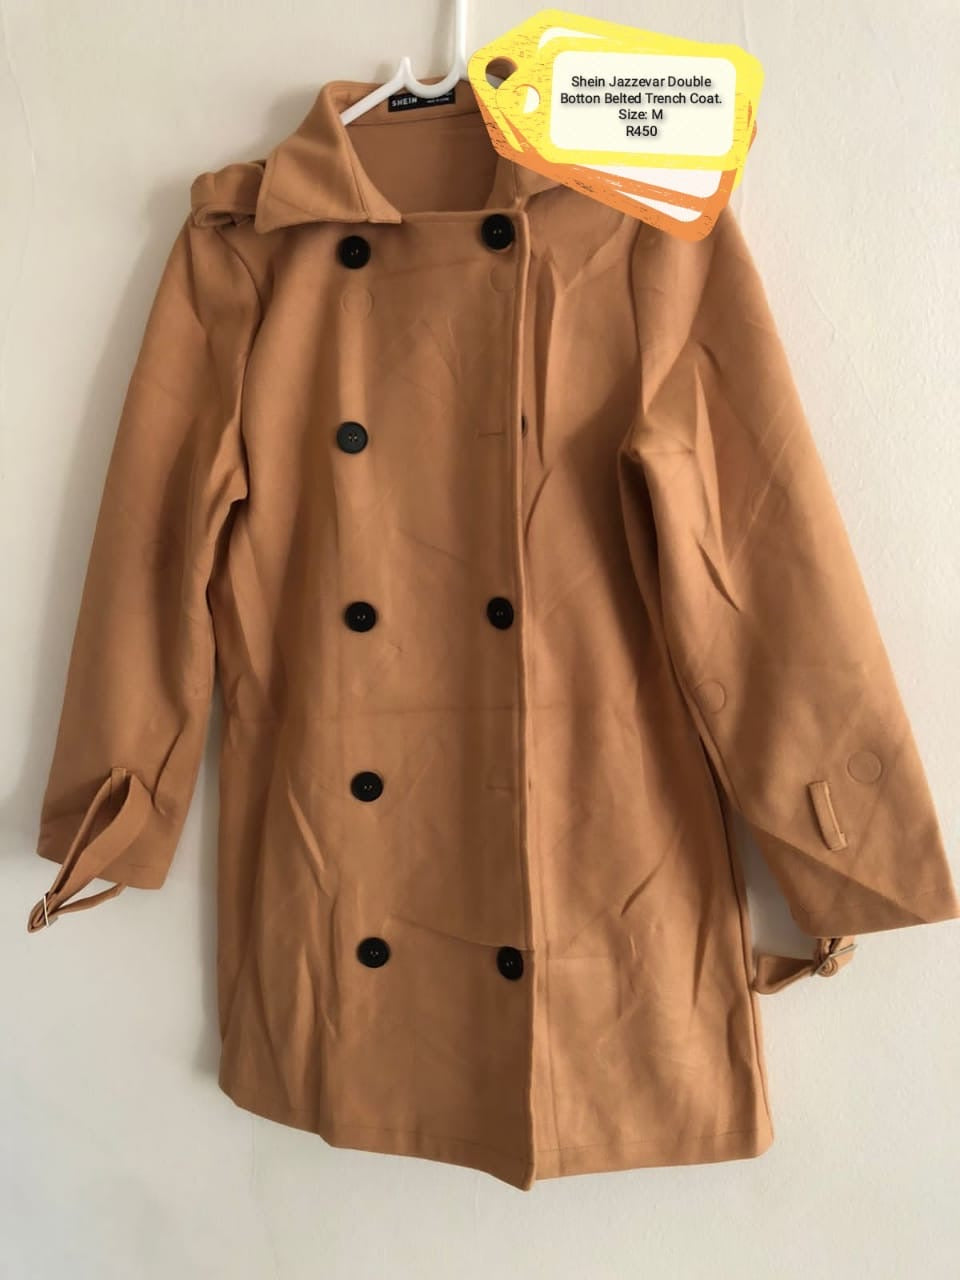 Image of Shein Jazzevar Double button belted trench coat